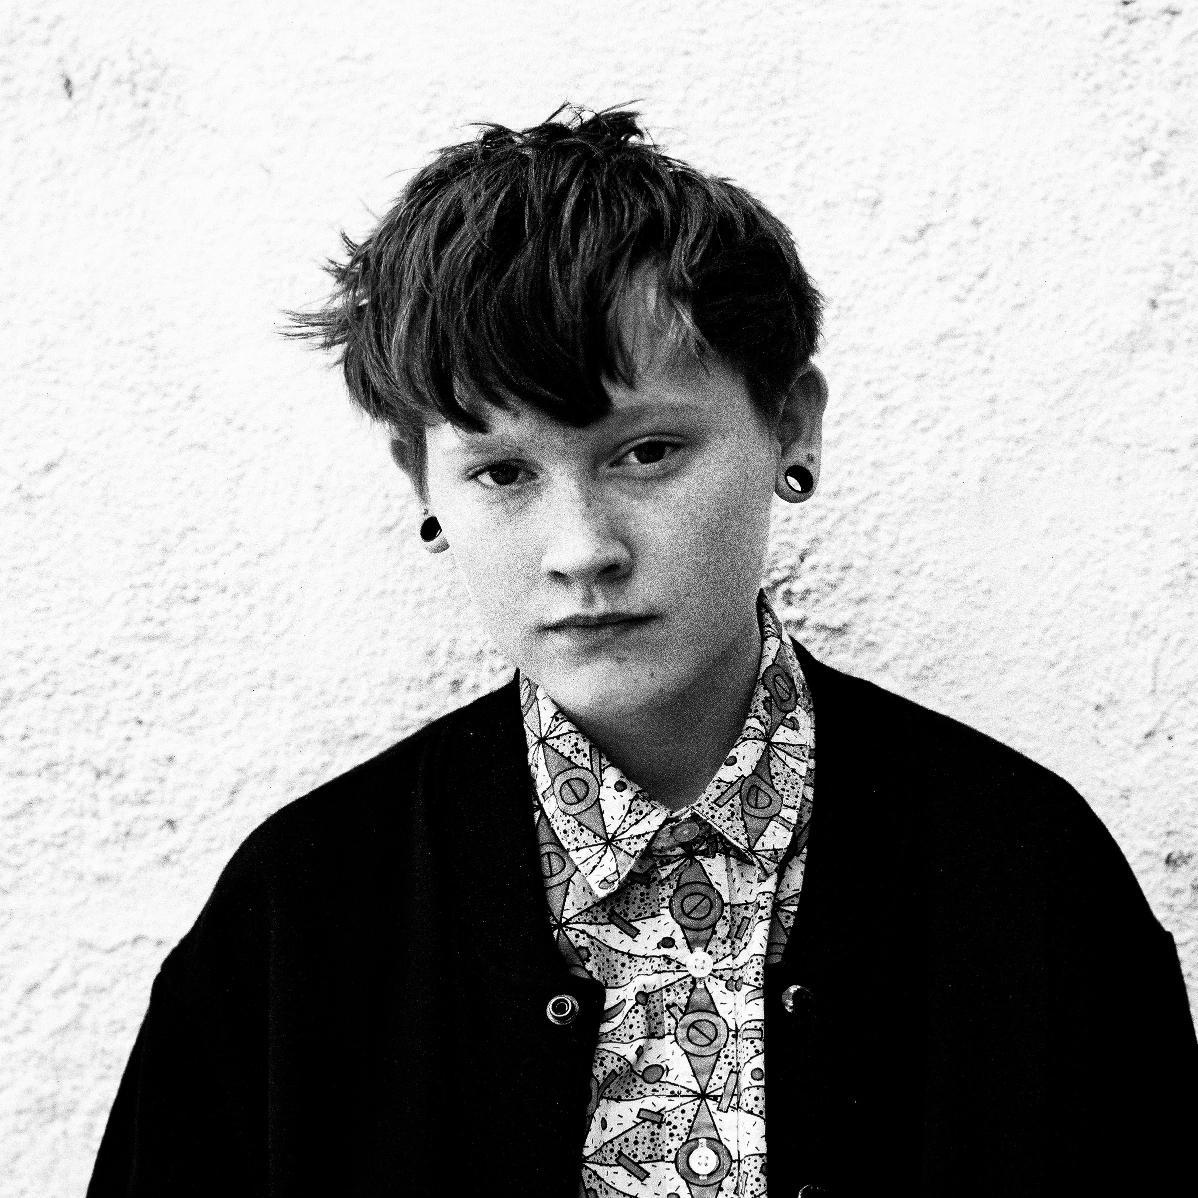 Soak covers Led Zeppelin's "Immigrant Song."